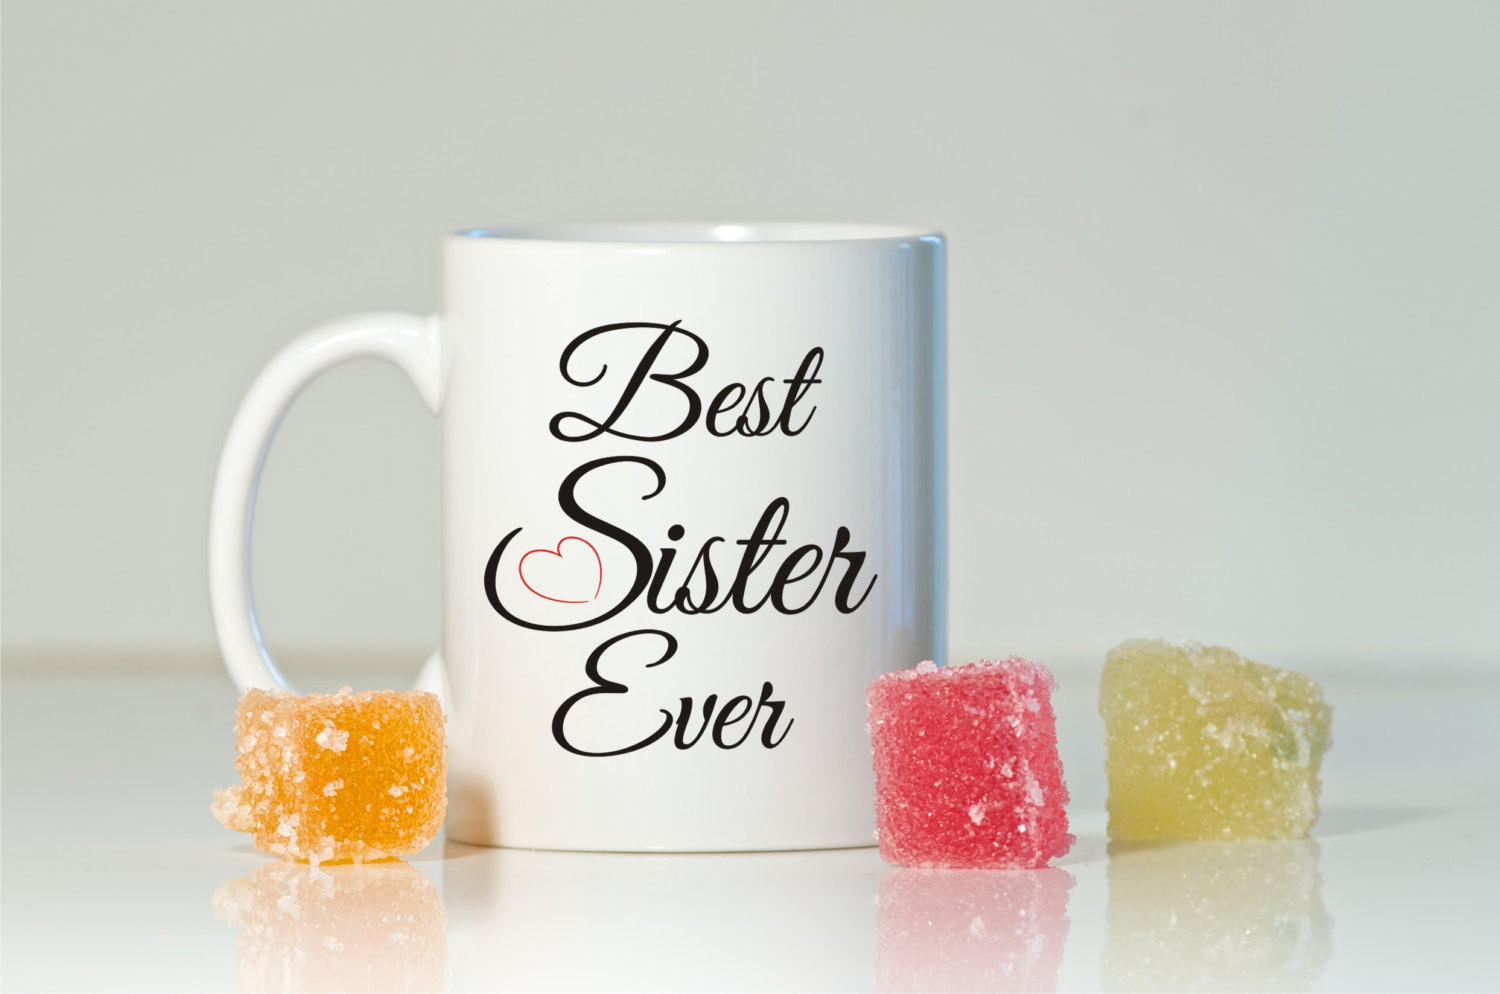 Best Gift Ideas For Sister
 Top 10 Best Unique Gifts Ideas To Give To Your Sister